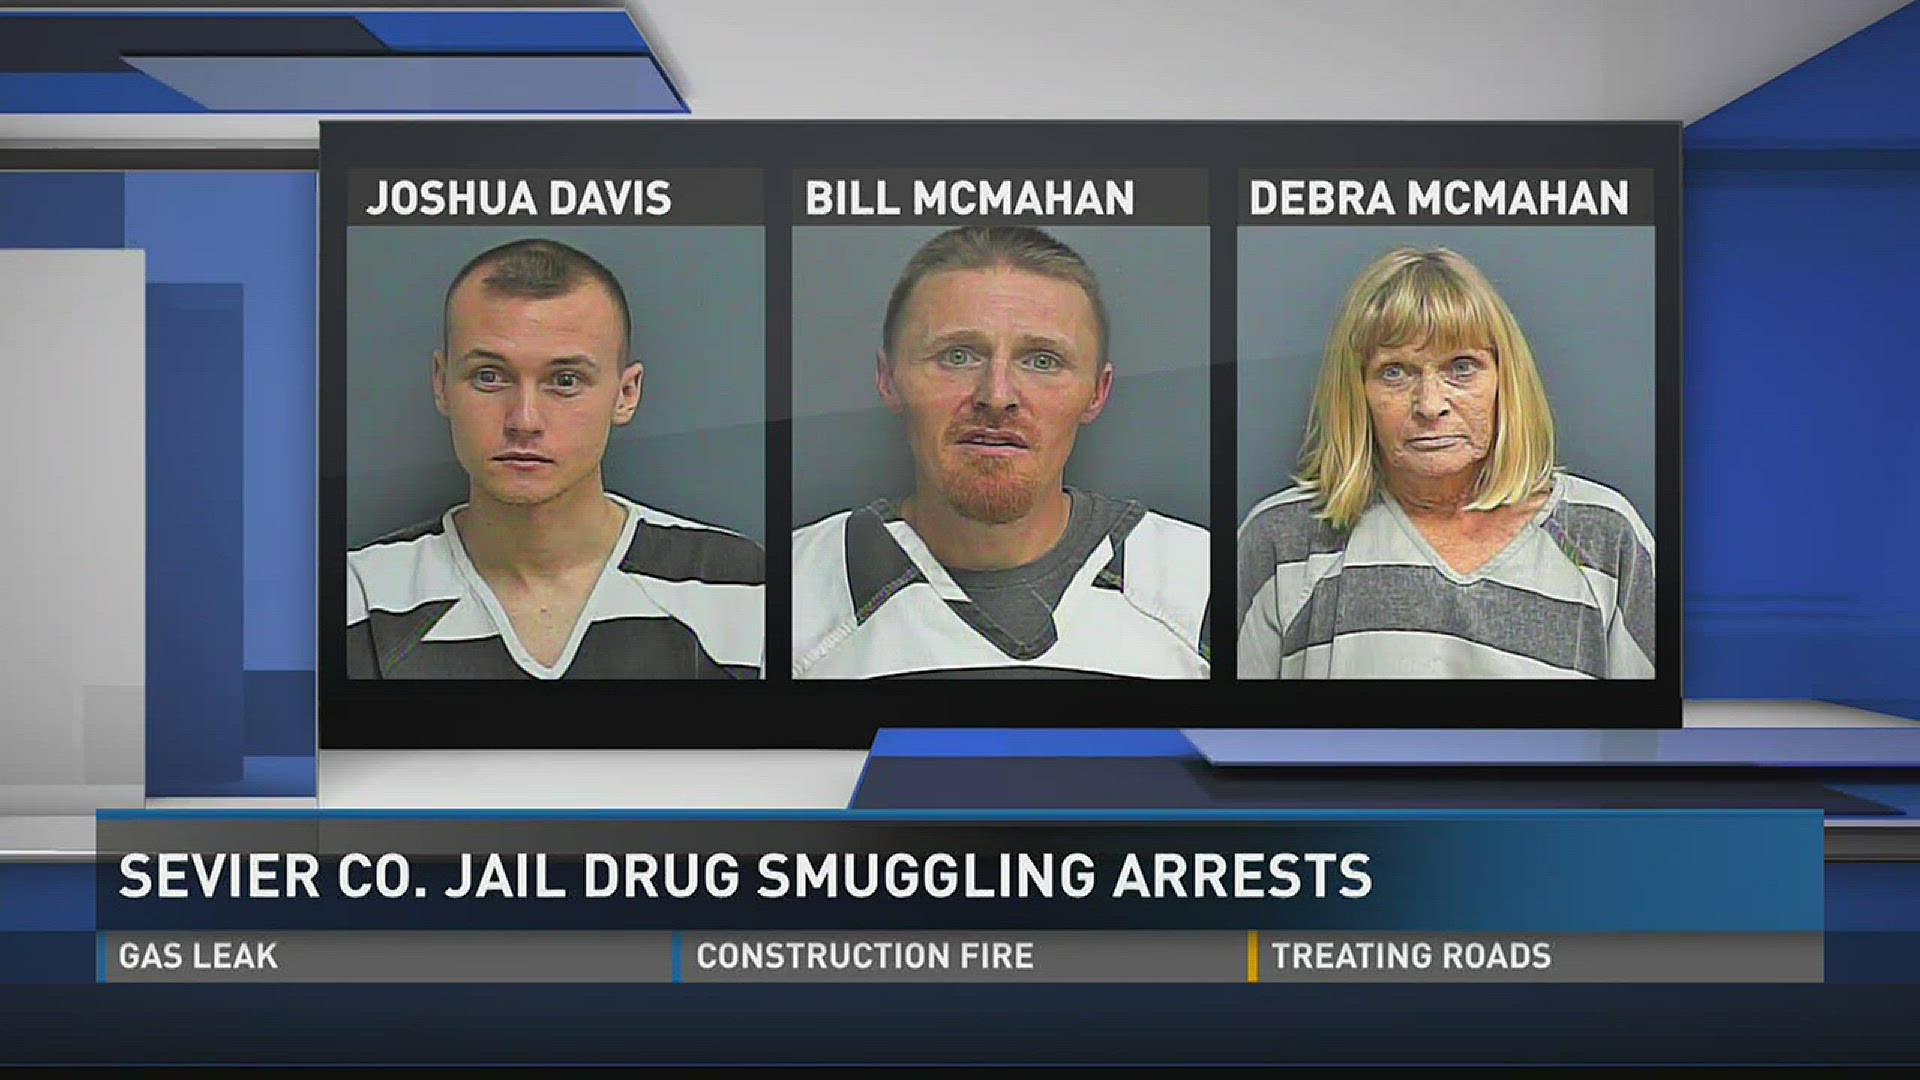 Jan. 5, 2017: Three people face drug charges for their alleged roles in trying to smuggle narcotics into the Sevier County Jail.